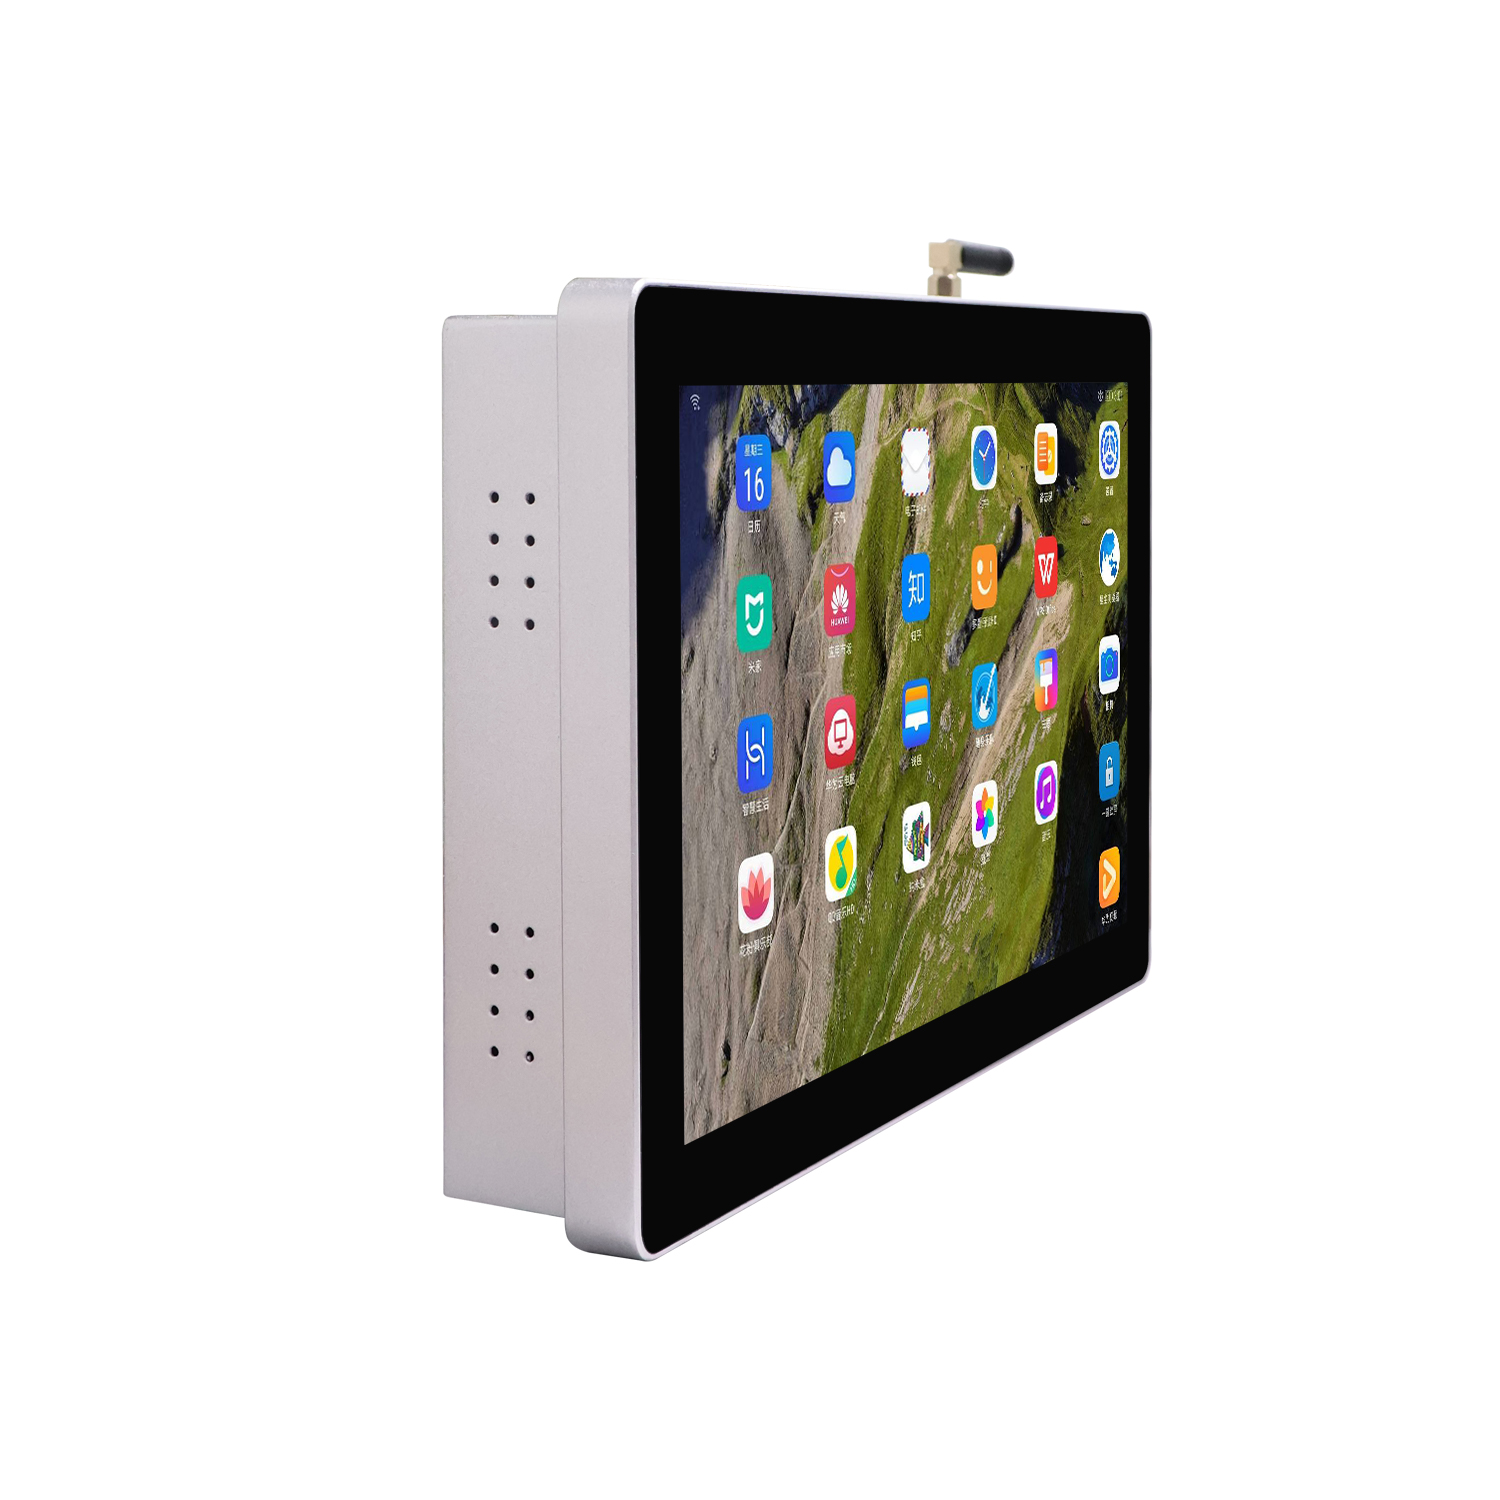 15.6 inch wall mounted android industrial panel pc with touchscreen monitor